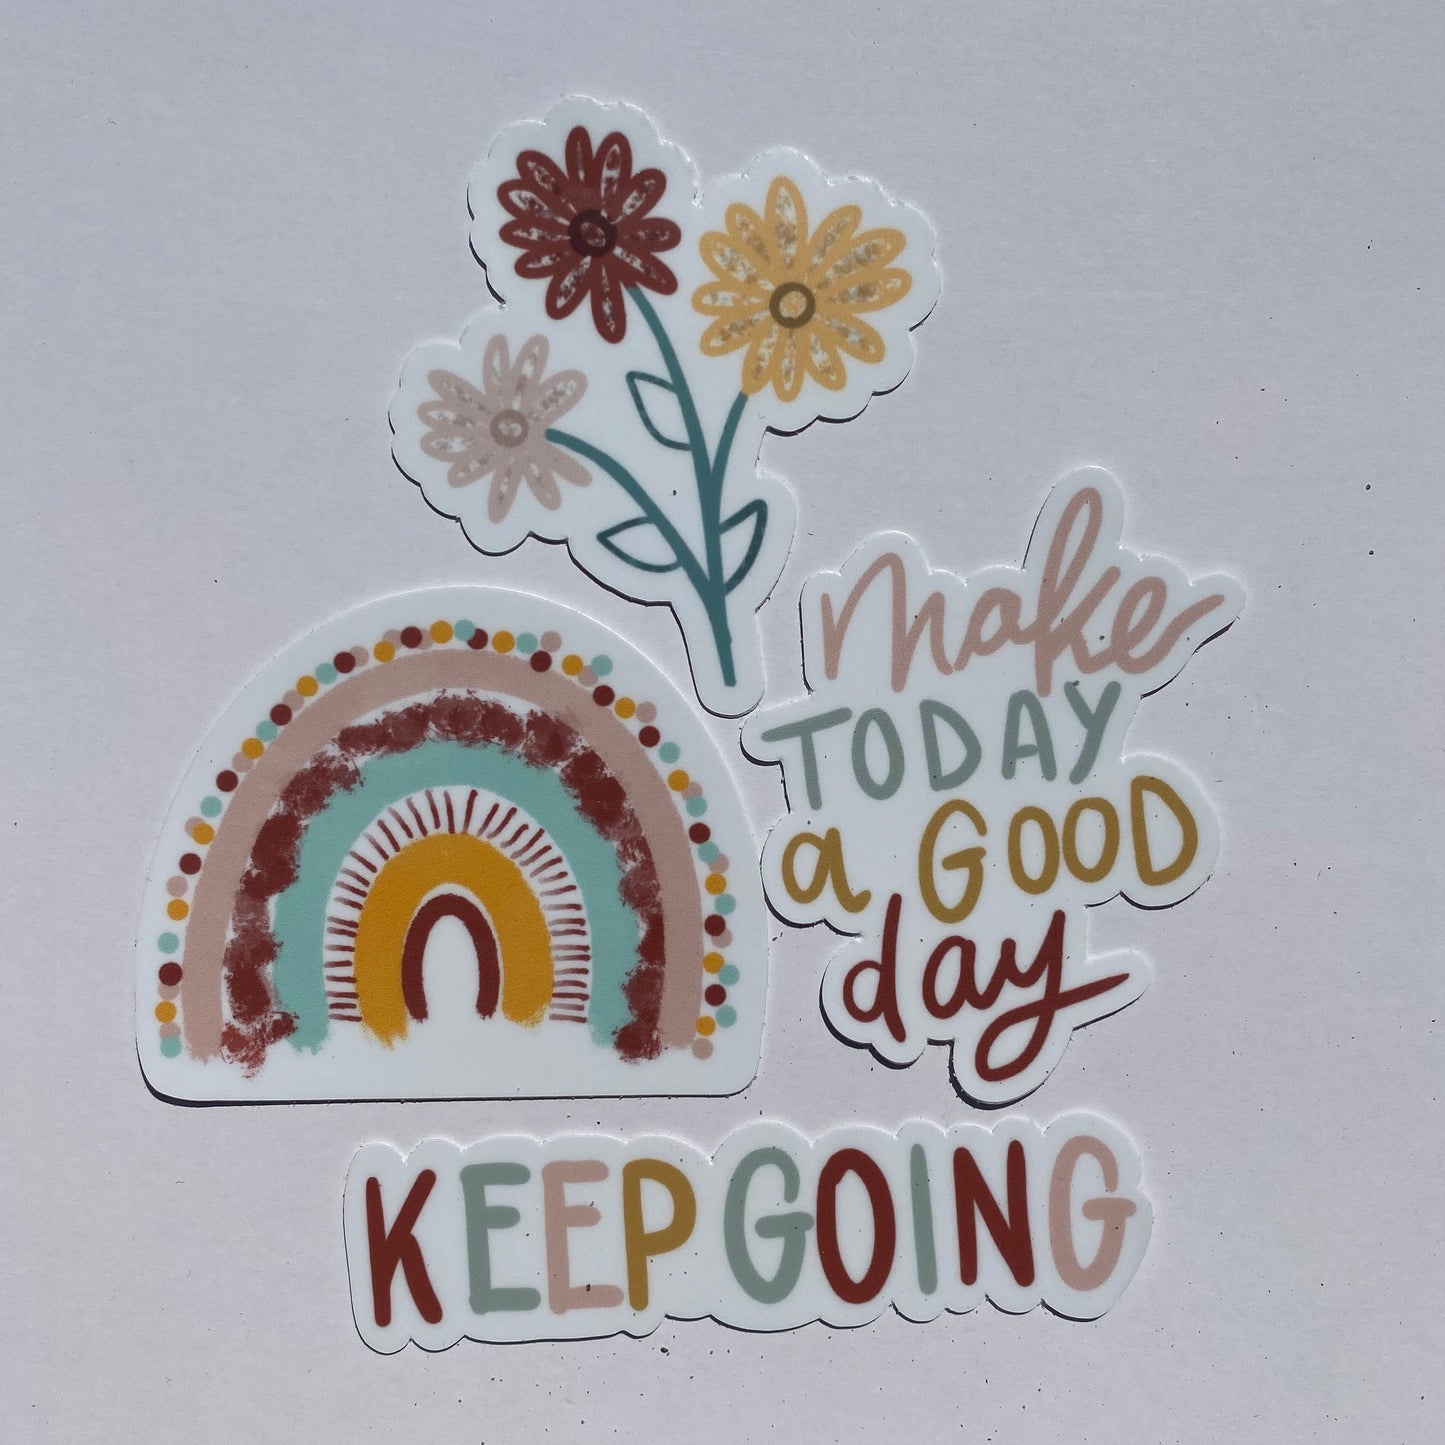 Motivational Sticker Pack - Colorful Dotted Watercolor Rainbow + Keep Going + Make Today a Good Day + Pink, Red, Yellow Flower Bunch